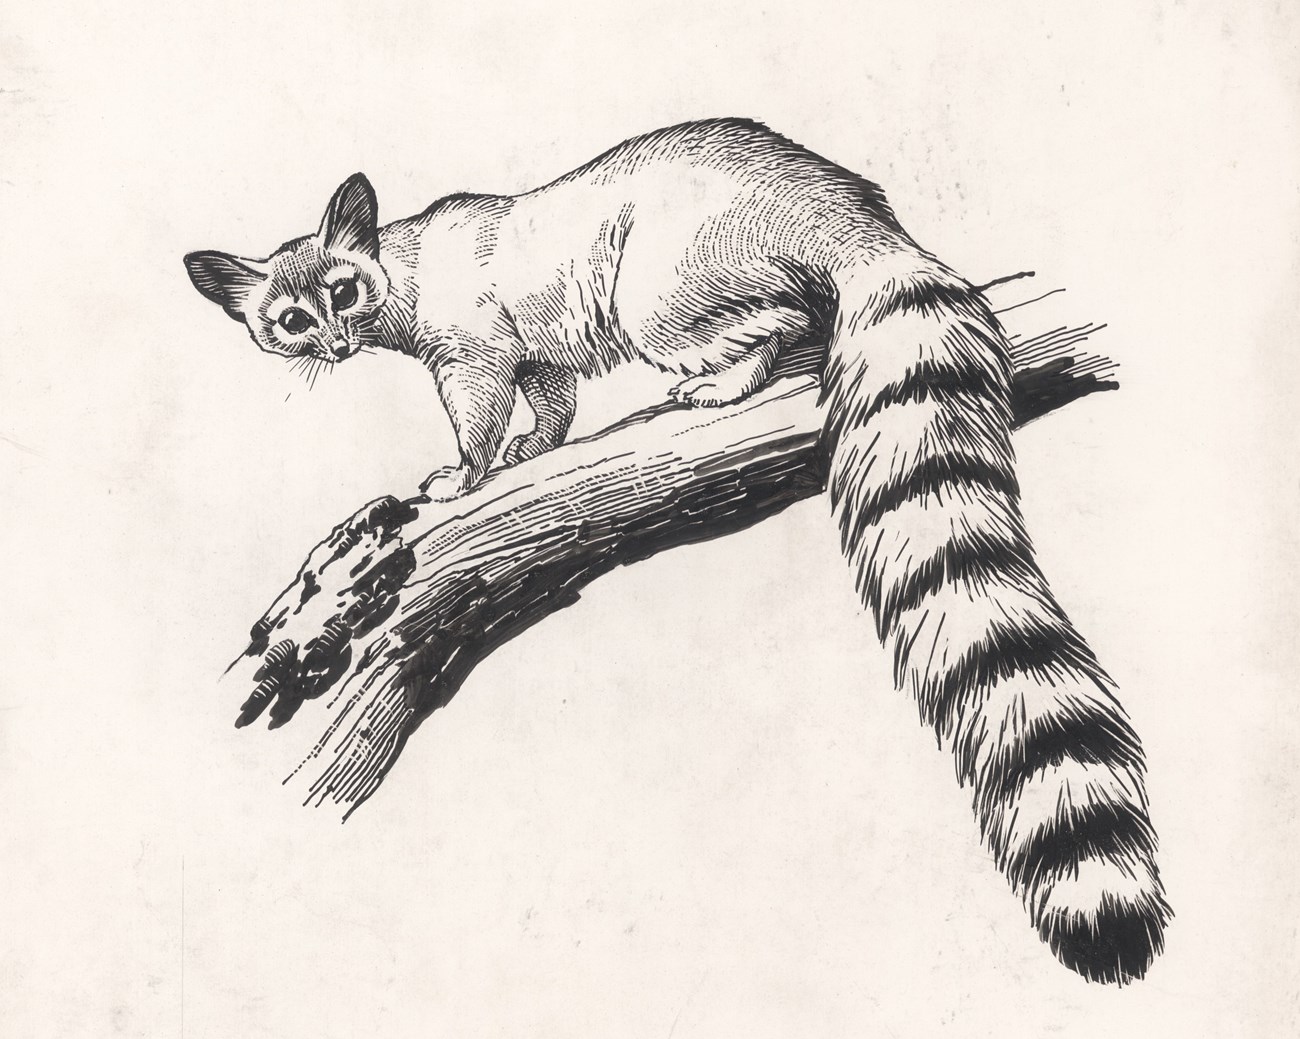 Pen-and-ink drawing of a ringtail on a tree branch